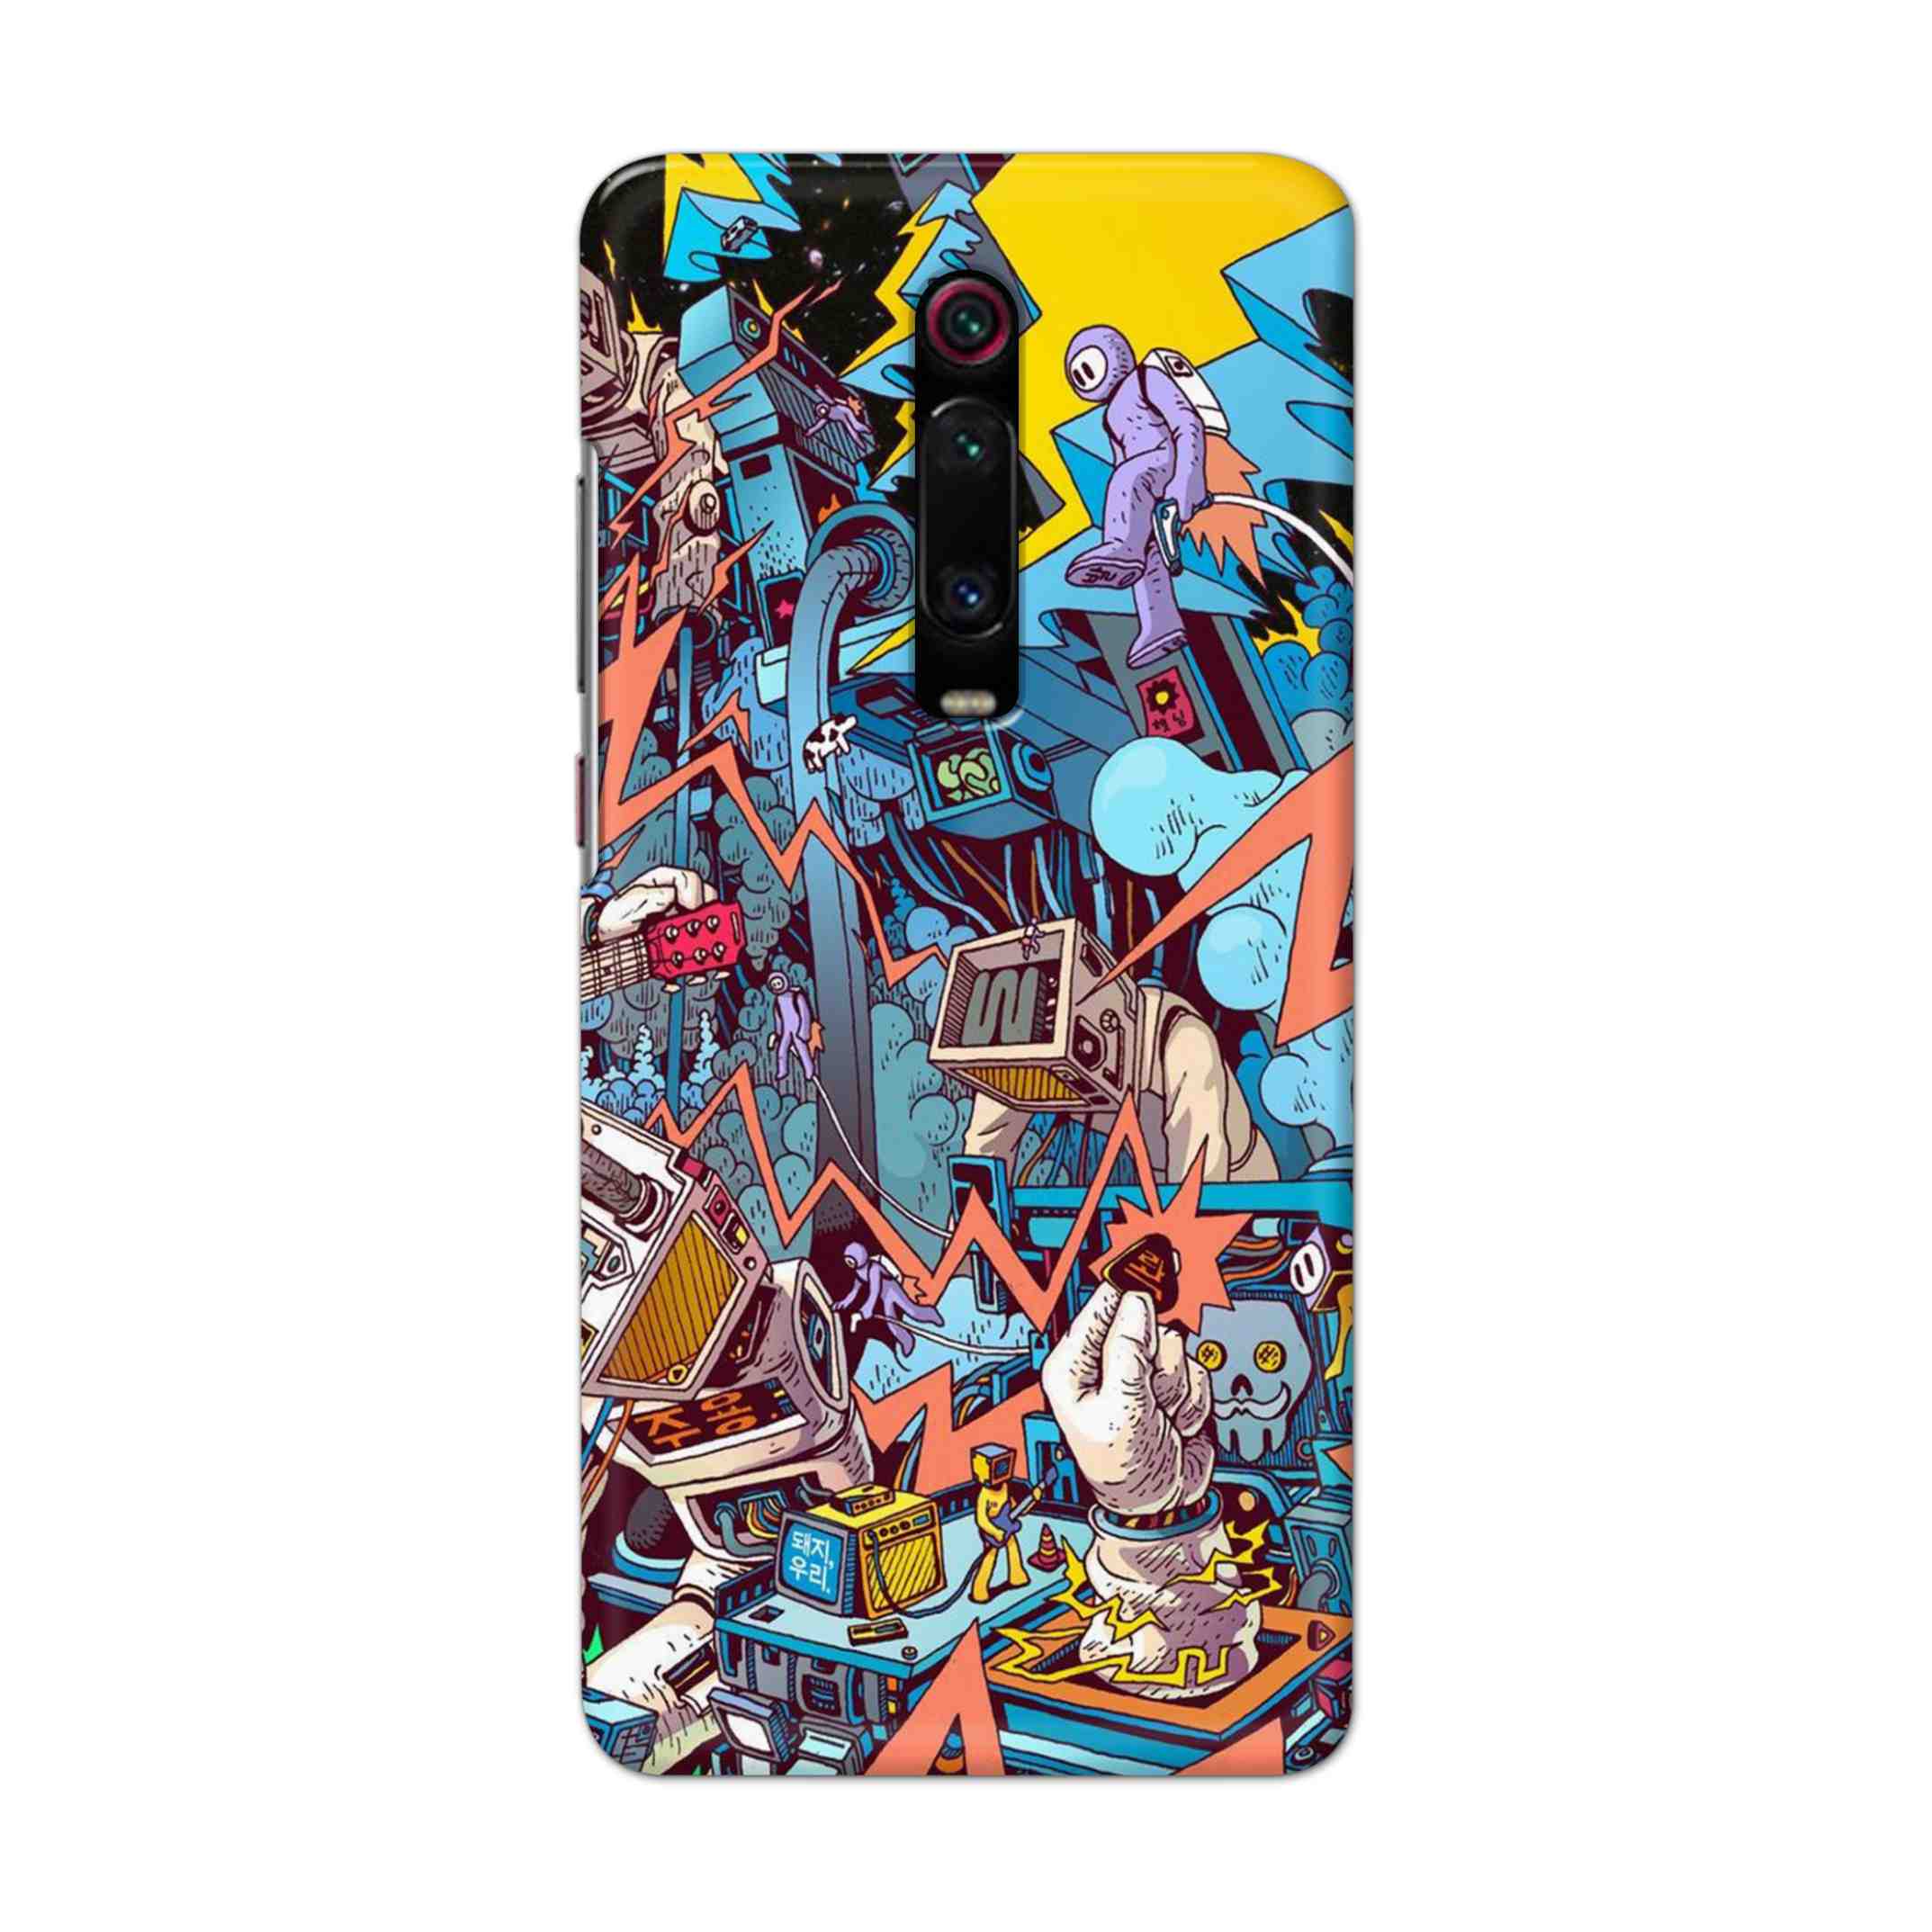 Buy Ofo Panic Hard Back Mobile Phone Case Cover For Xiaomi Redmi K20 Online